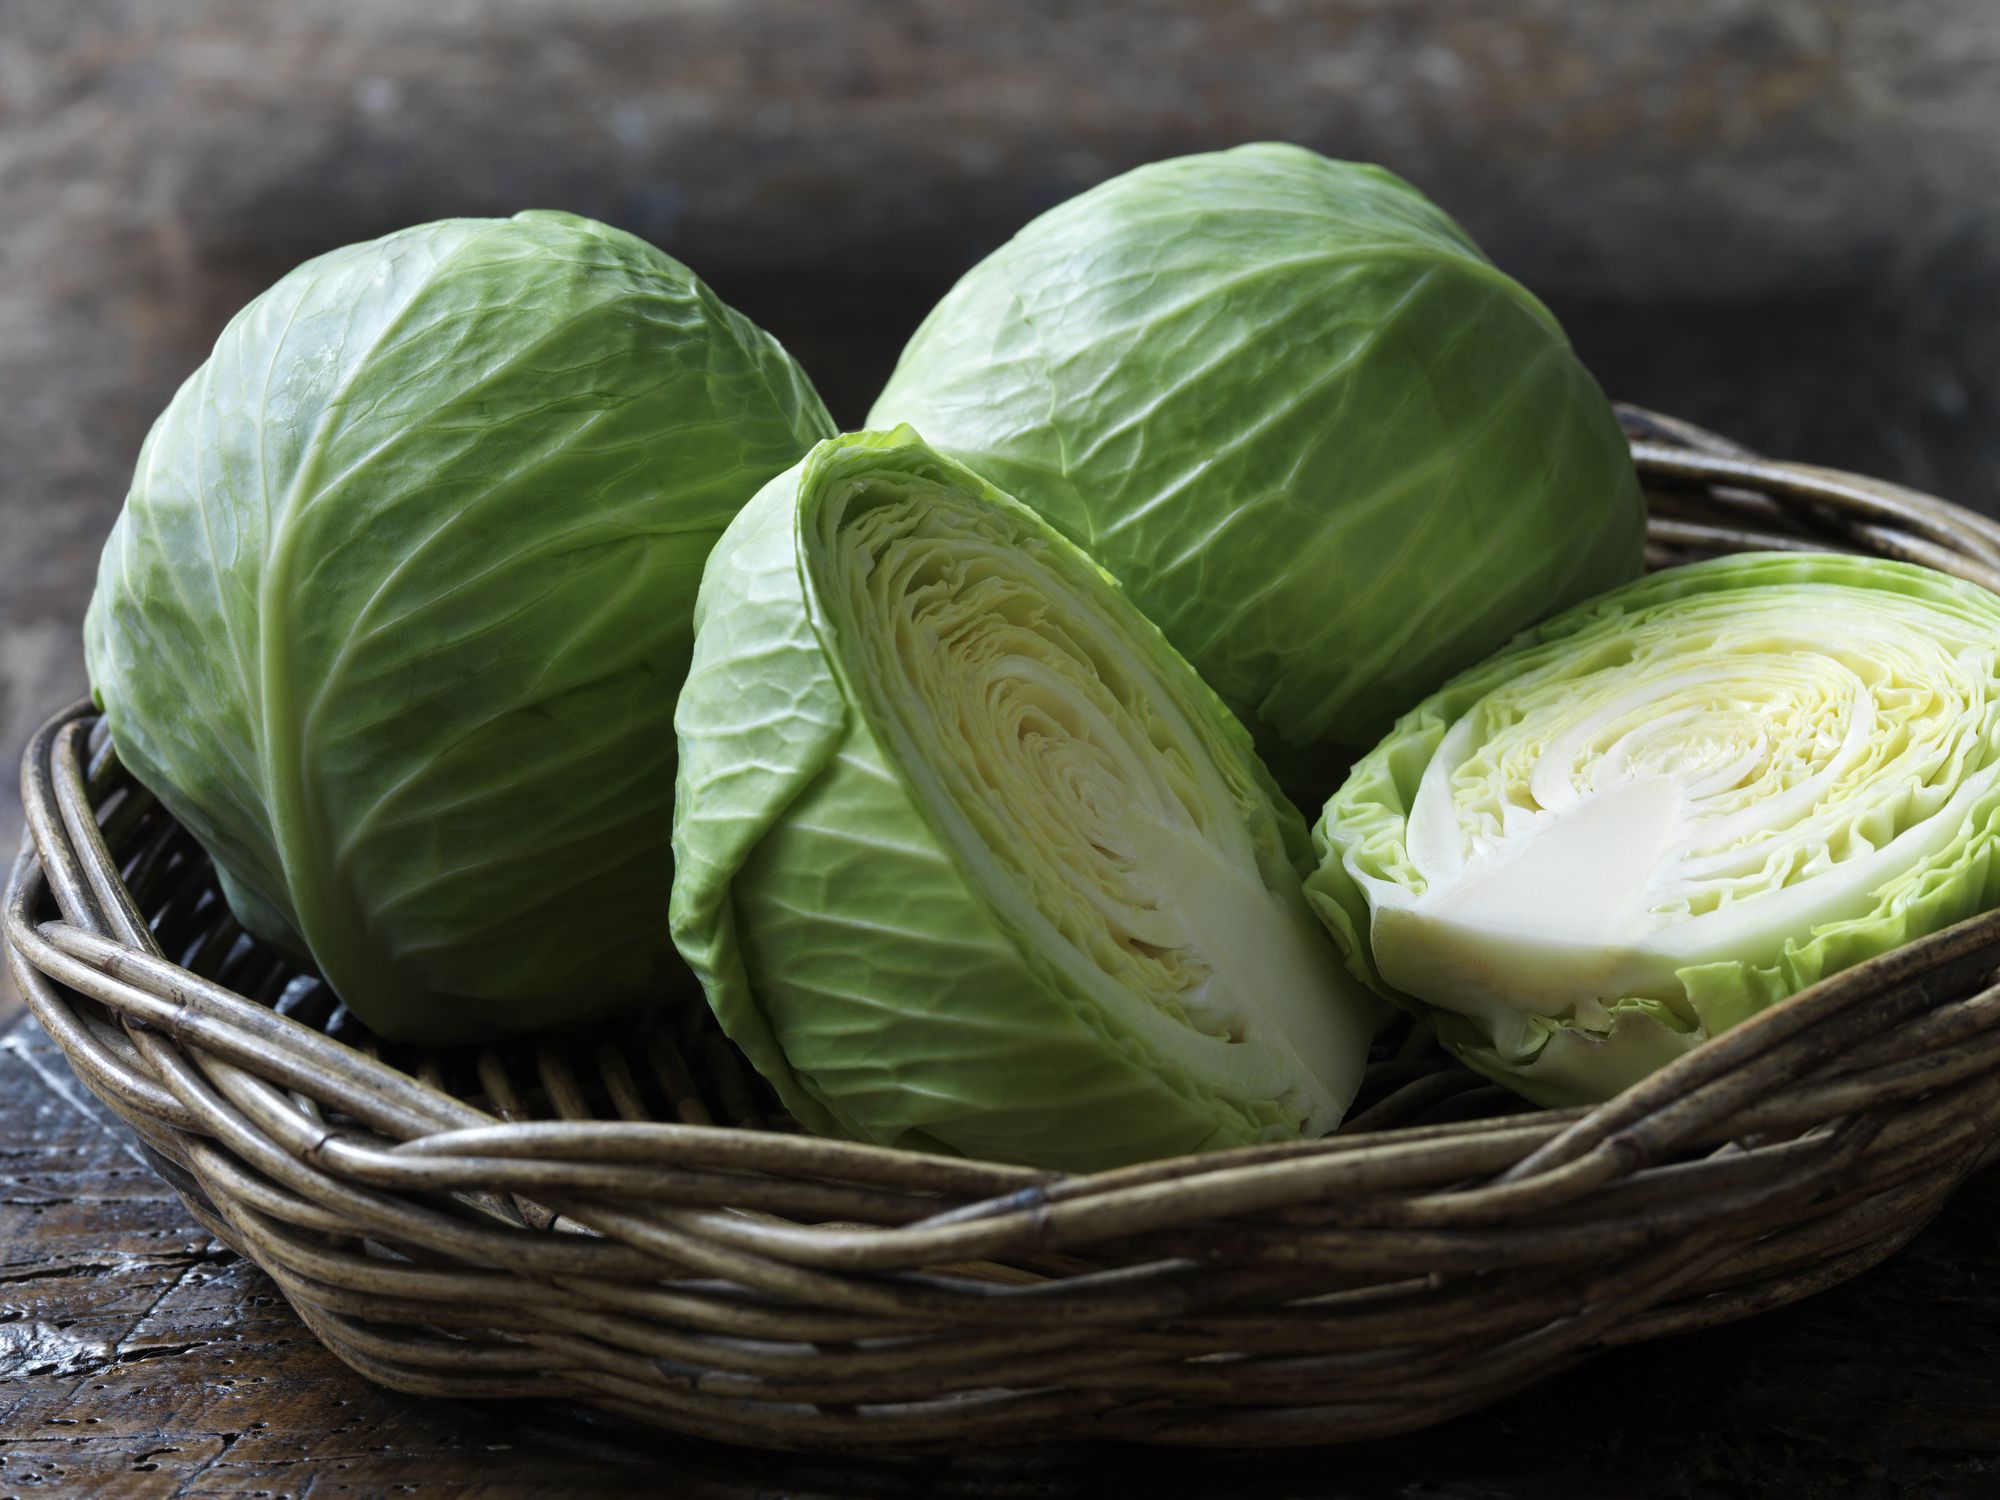 Cabbage gathered for guinea pigs to eat